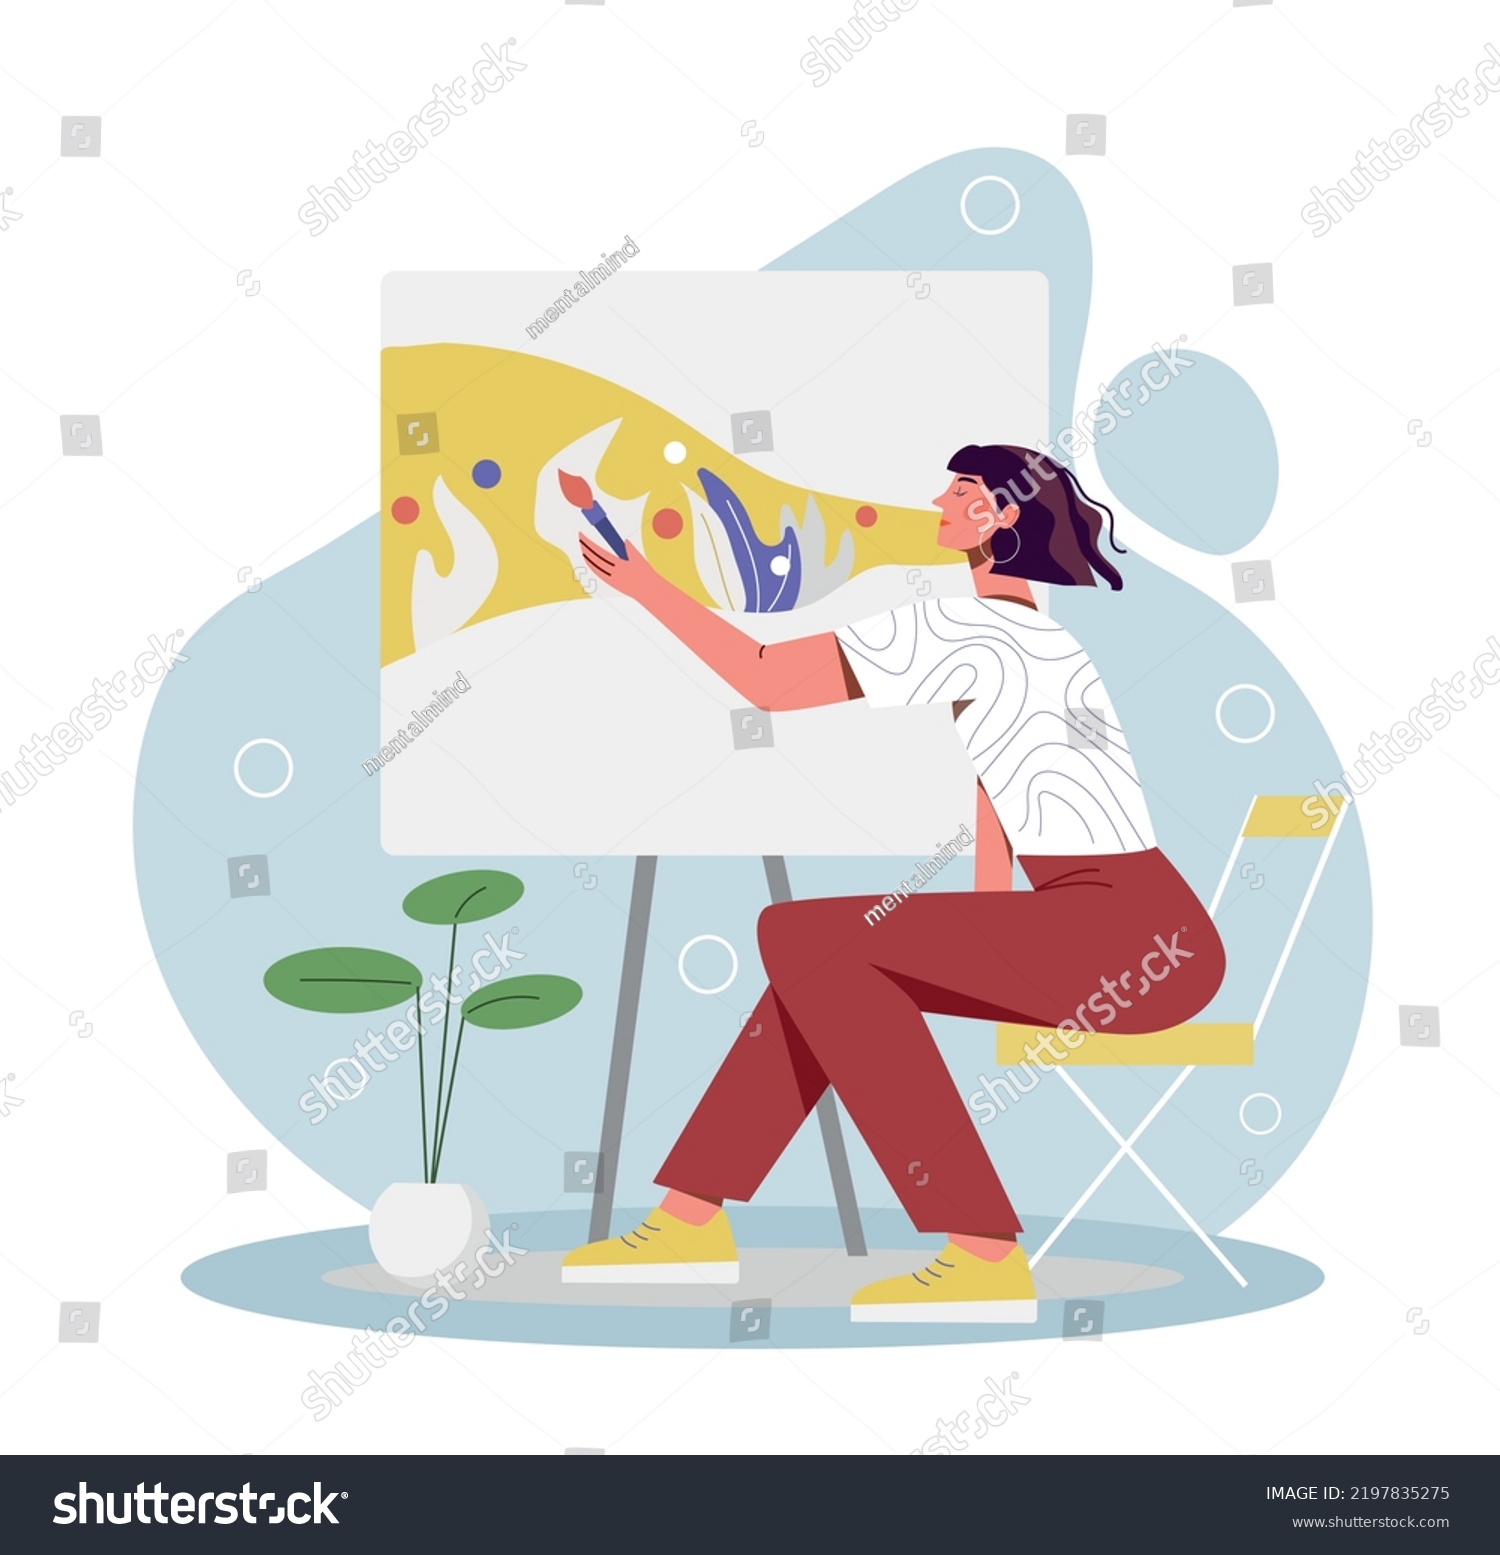 World art day. Poster or banner for international holidays, greeting card design. Young girl draws picture with paints, artist at work. Creative personality, hobby. Cartoon flat vector illustration #2197835275